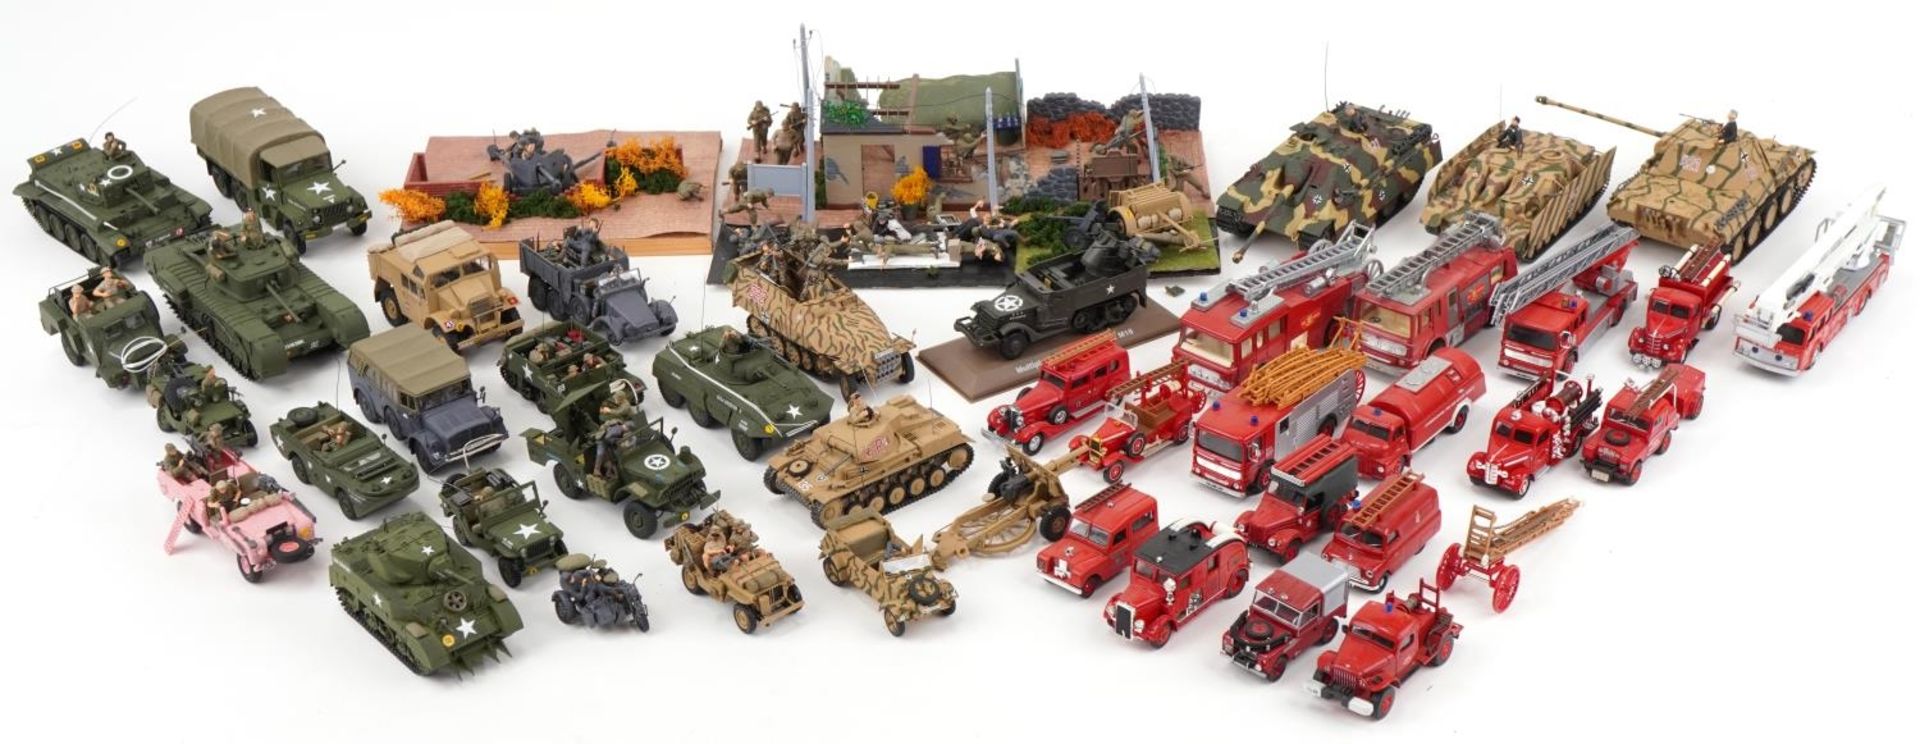 Large collection of vintage and later collector's fire engines and army vehicles including Corgi and